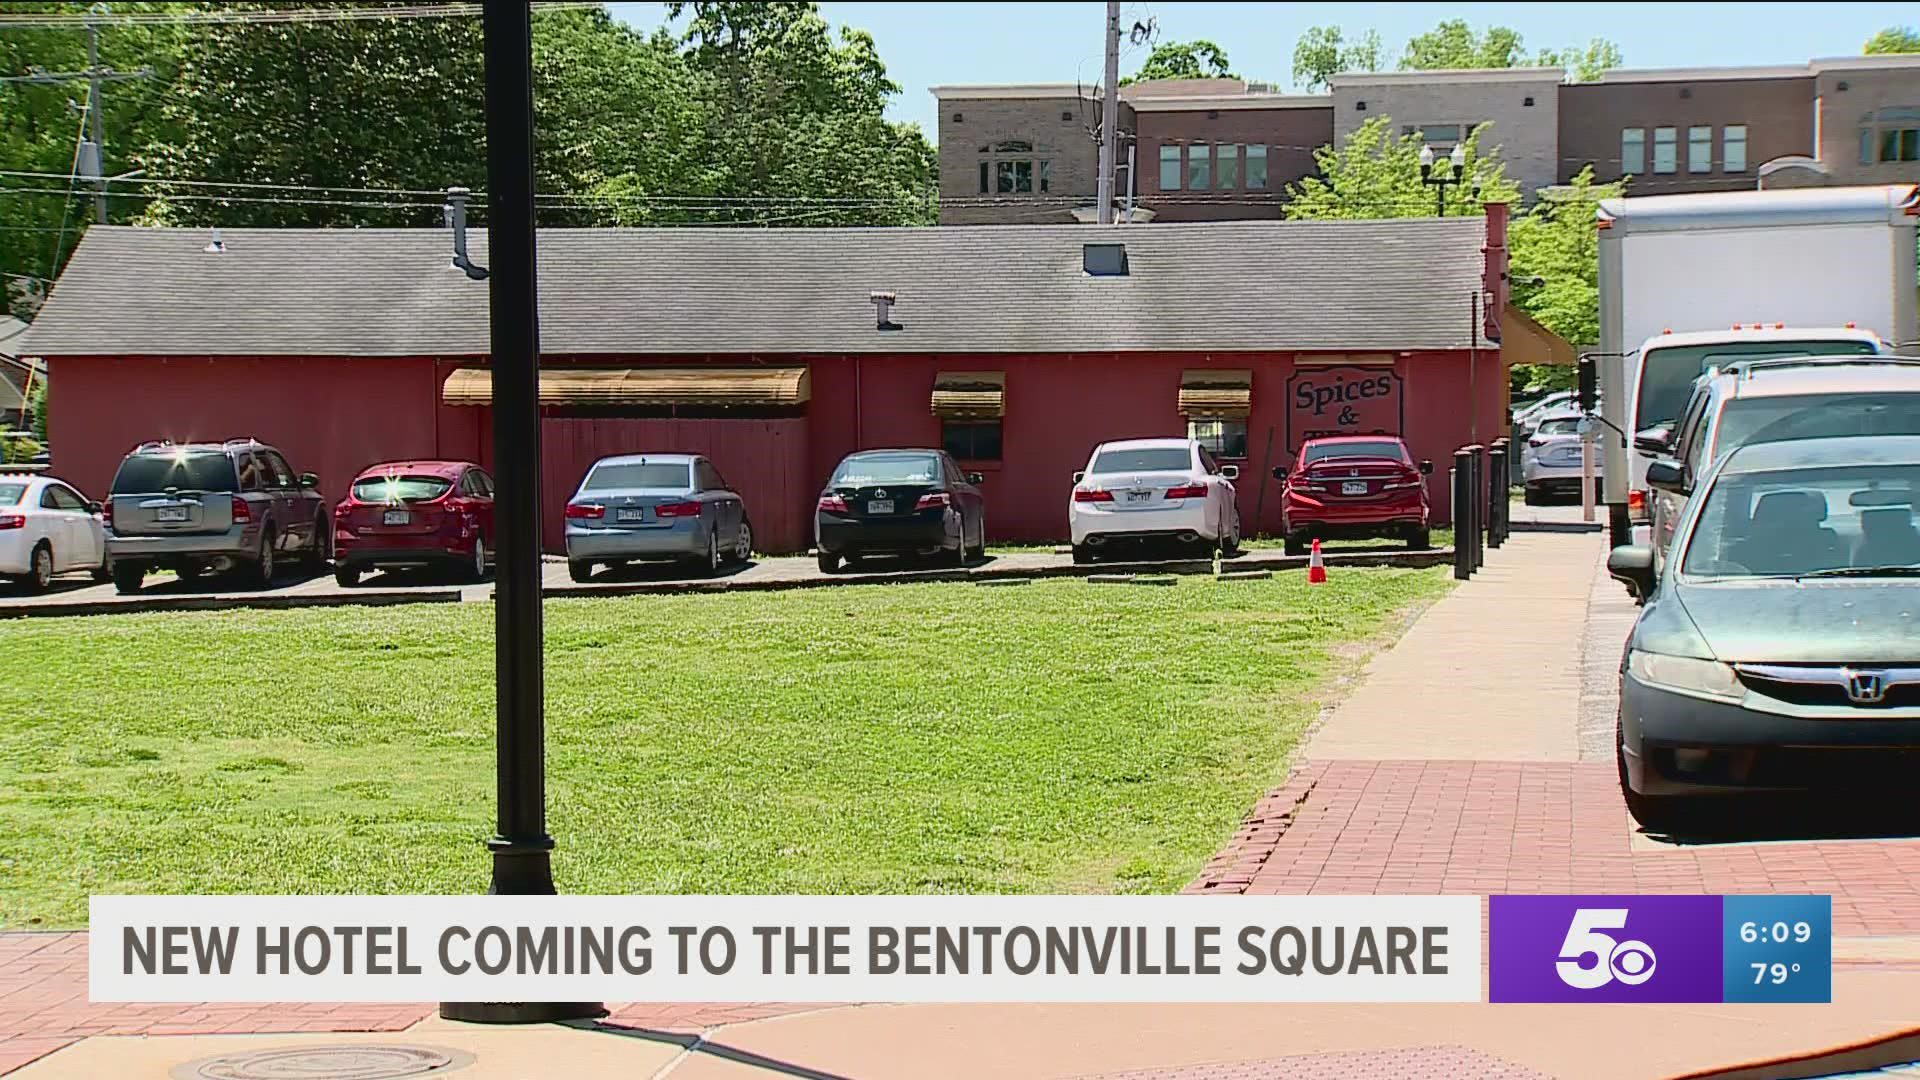 The hotel, to be located in the Bentonville Square, will include an event space, restaurant, bar, café and two retail spaces with the plan to open by summer 2024.